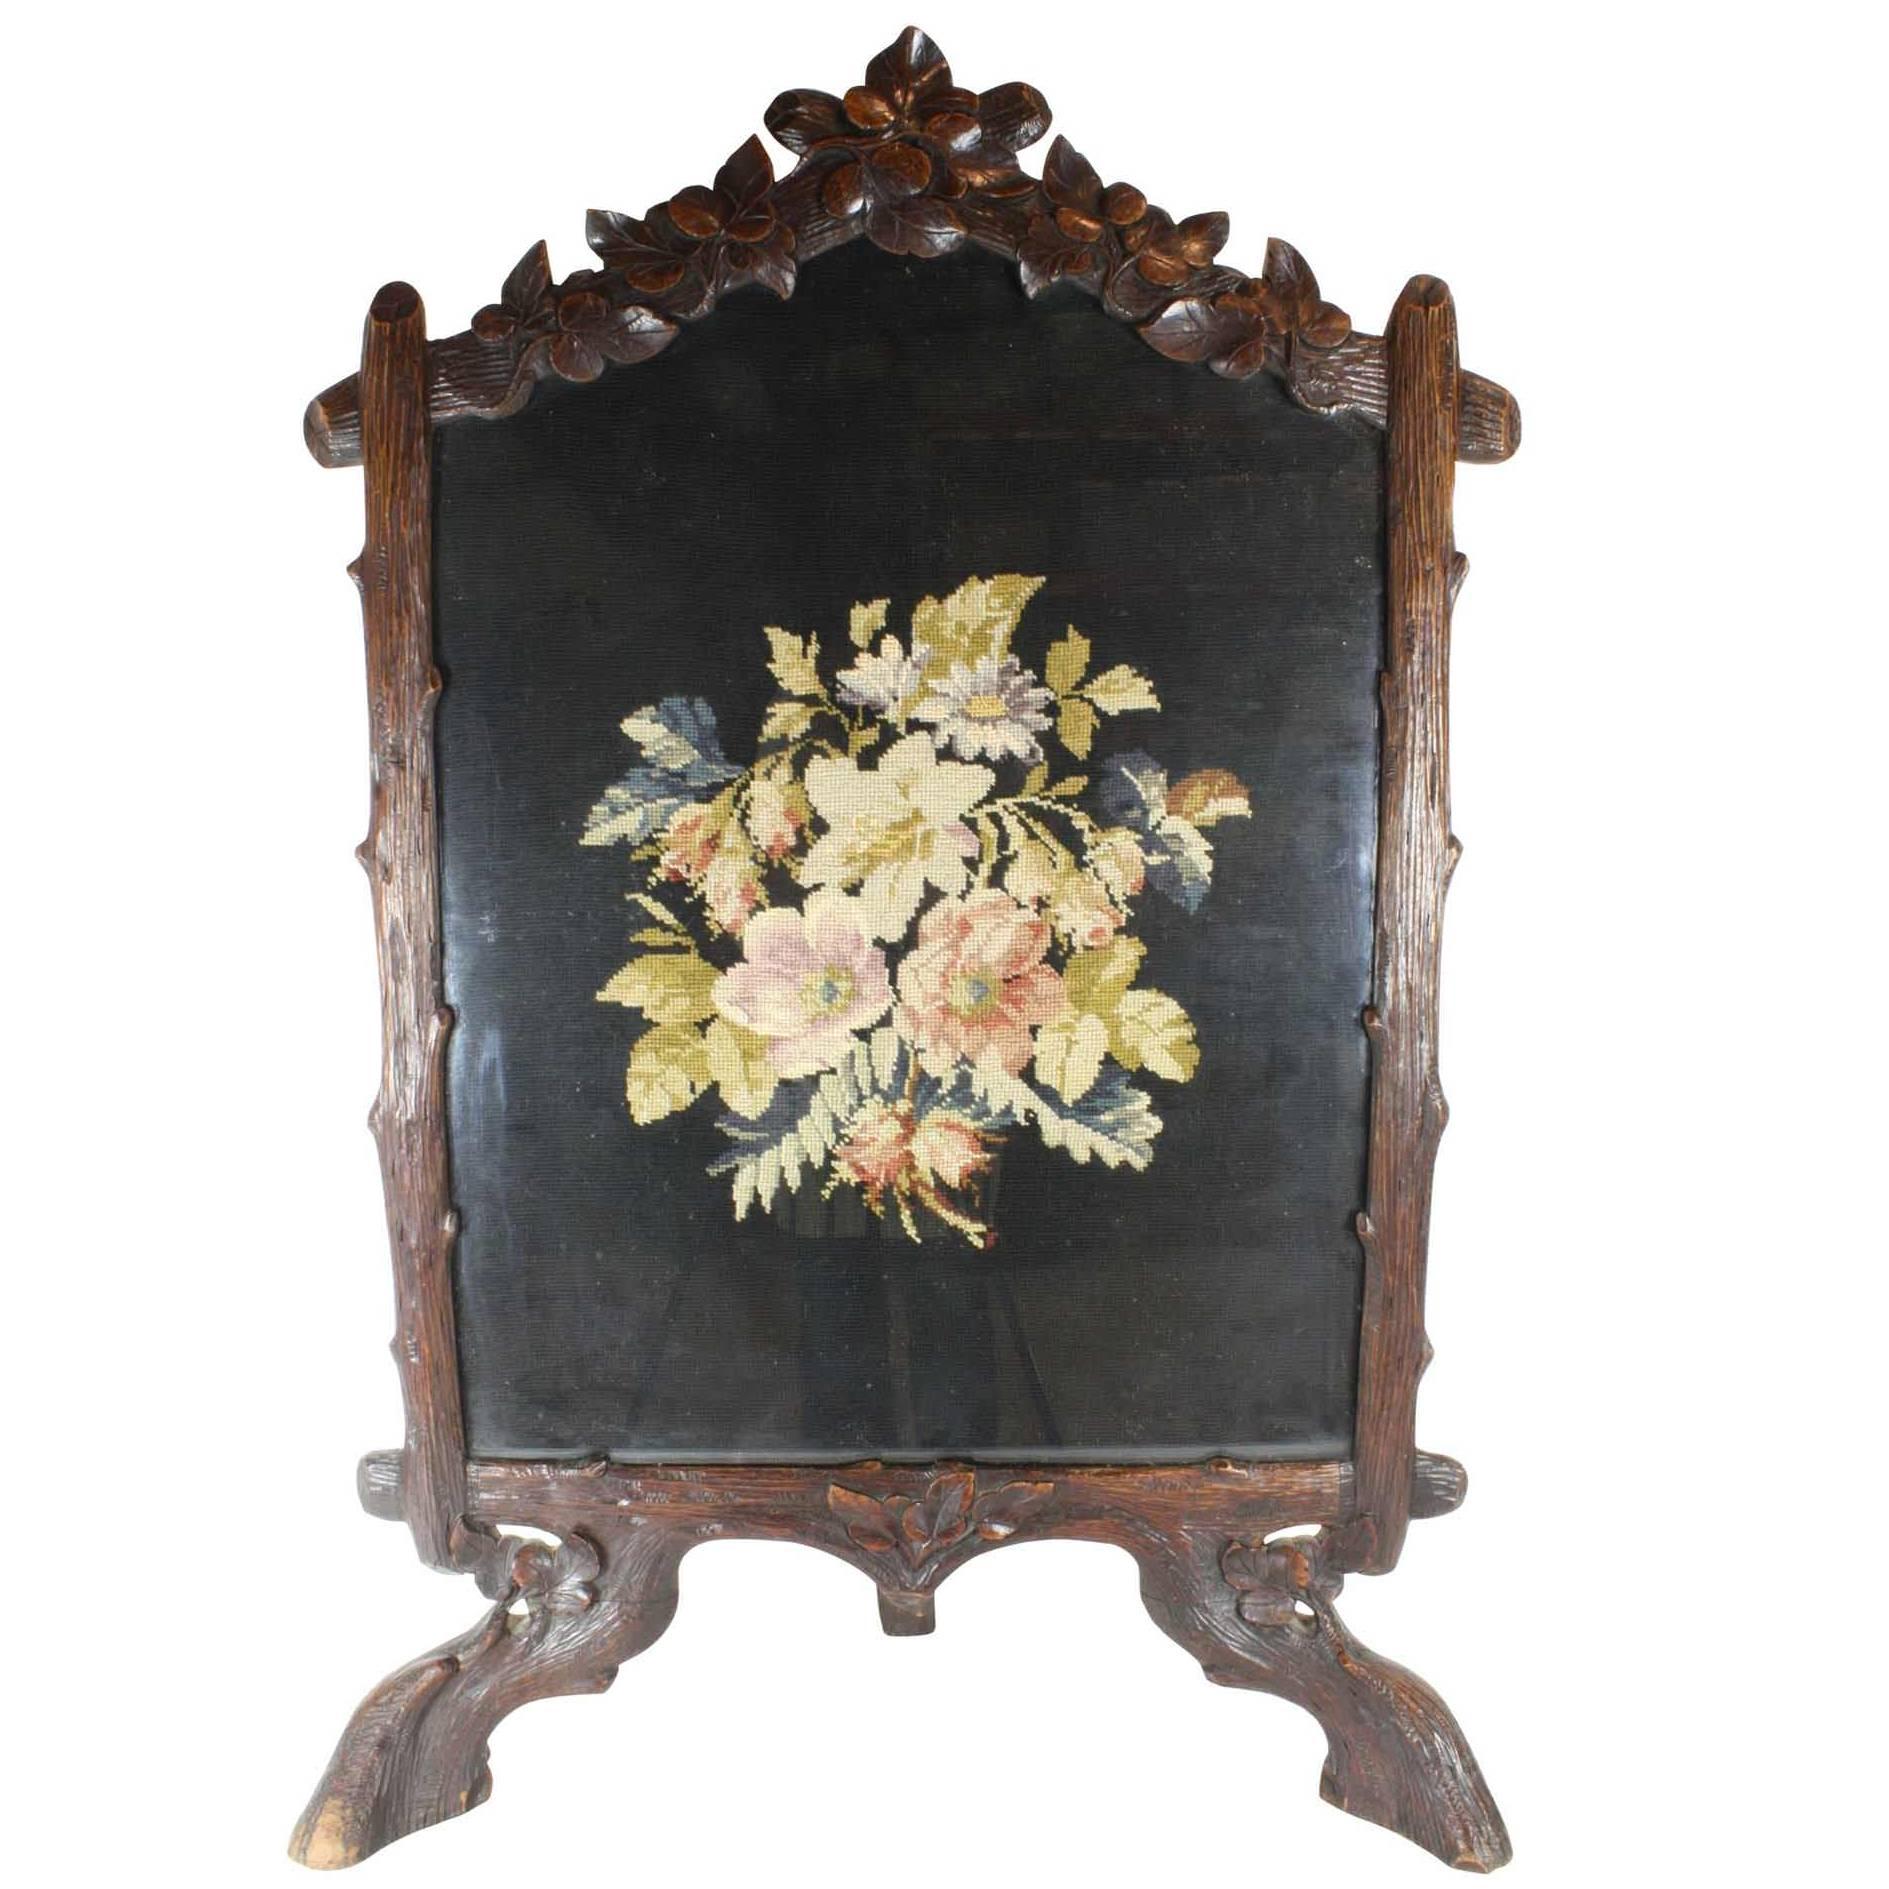 Late 19th Century Black Forest Fireplace Screen with 20th Century Needlepoint